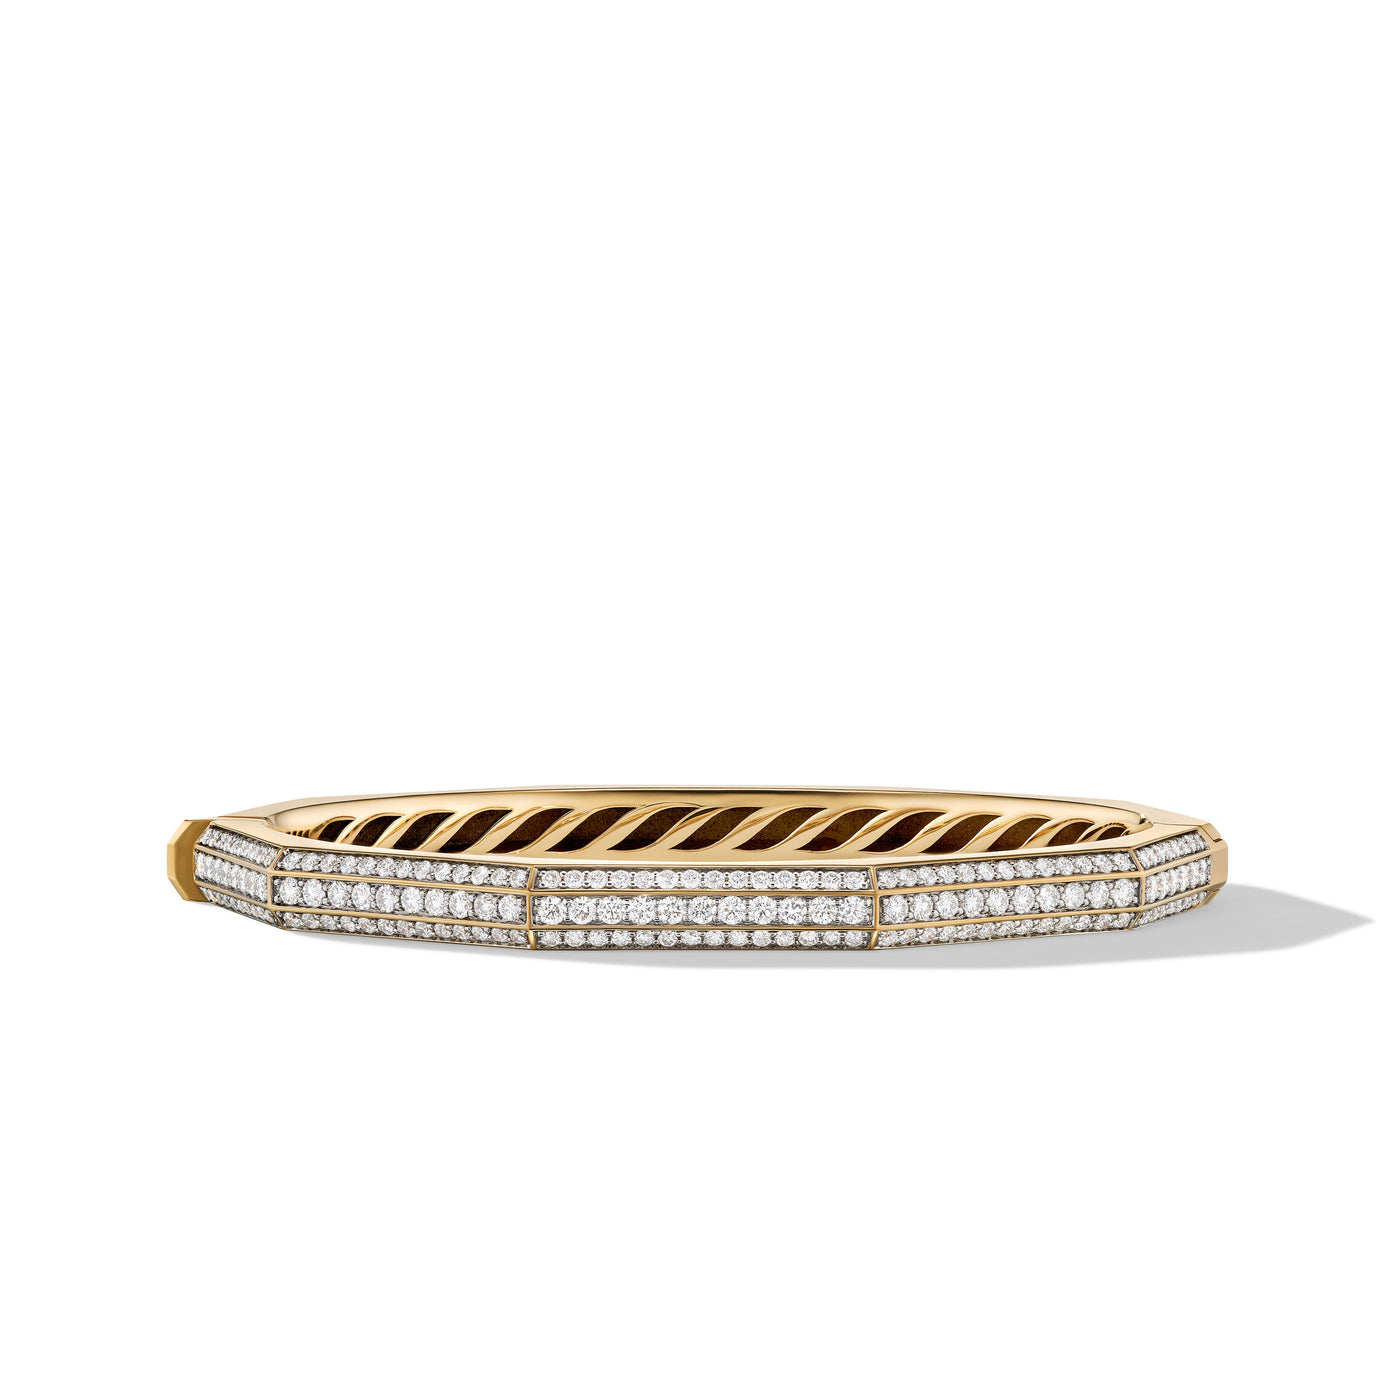 Carlyle™ Bracelet in 18K Yellow Gold with Diamonds\, 5.5mm